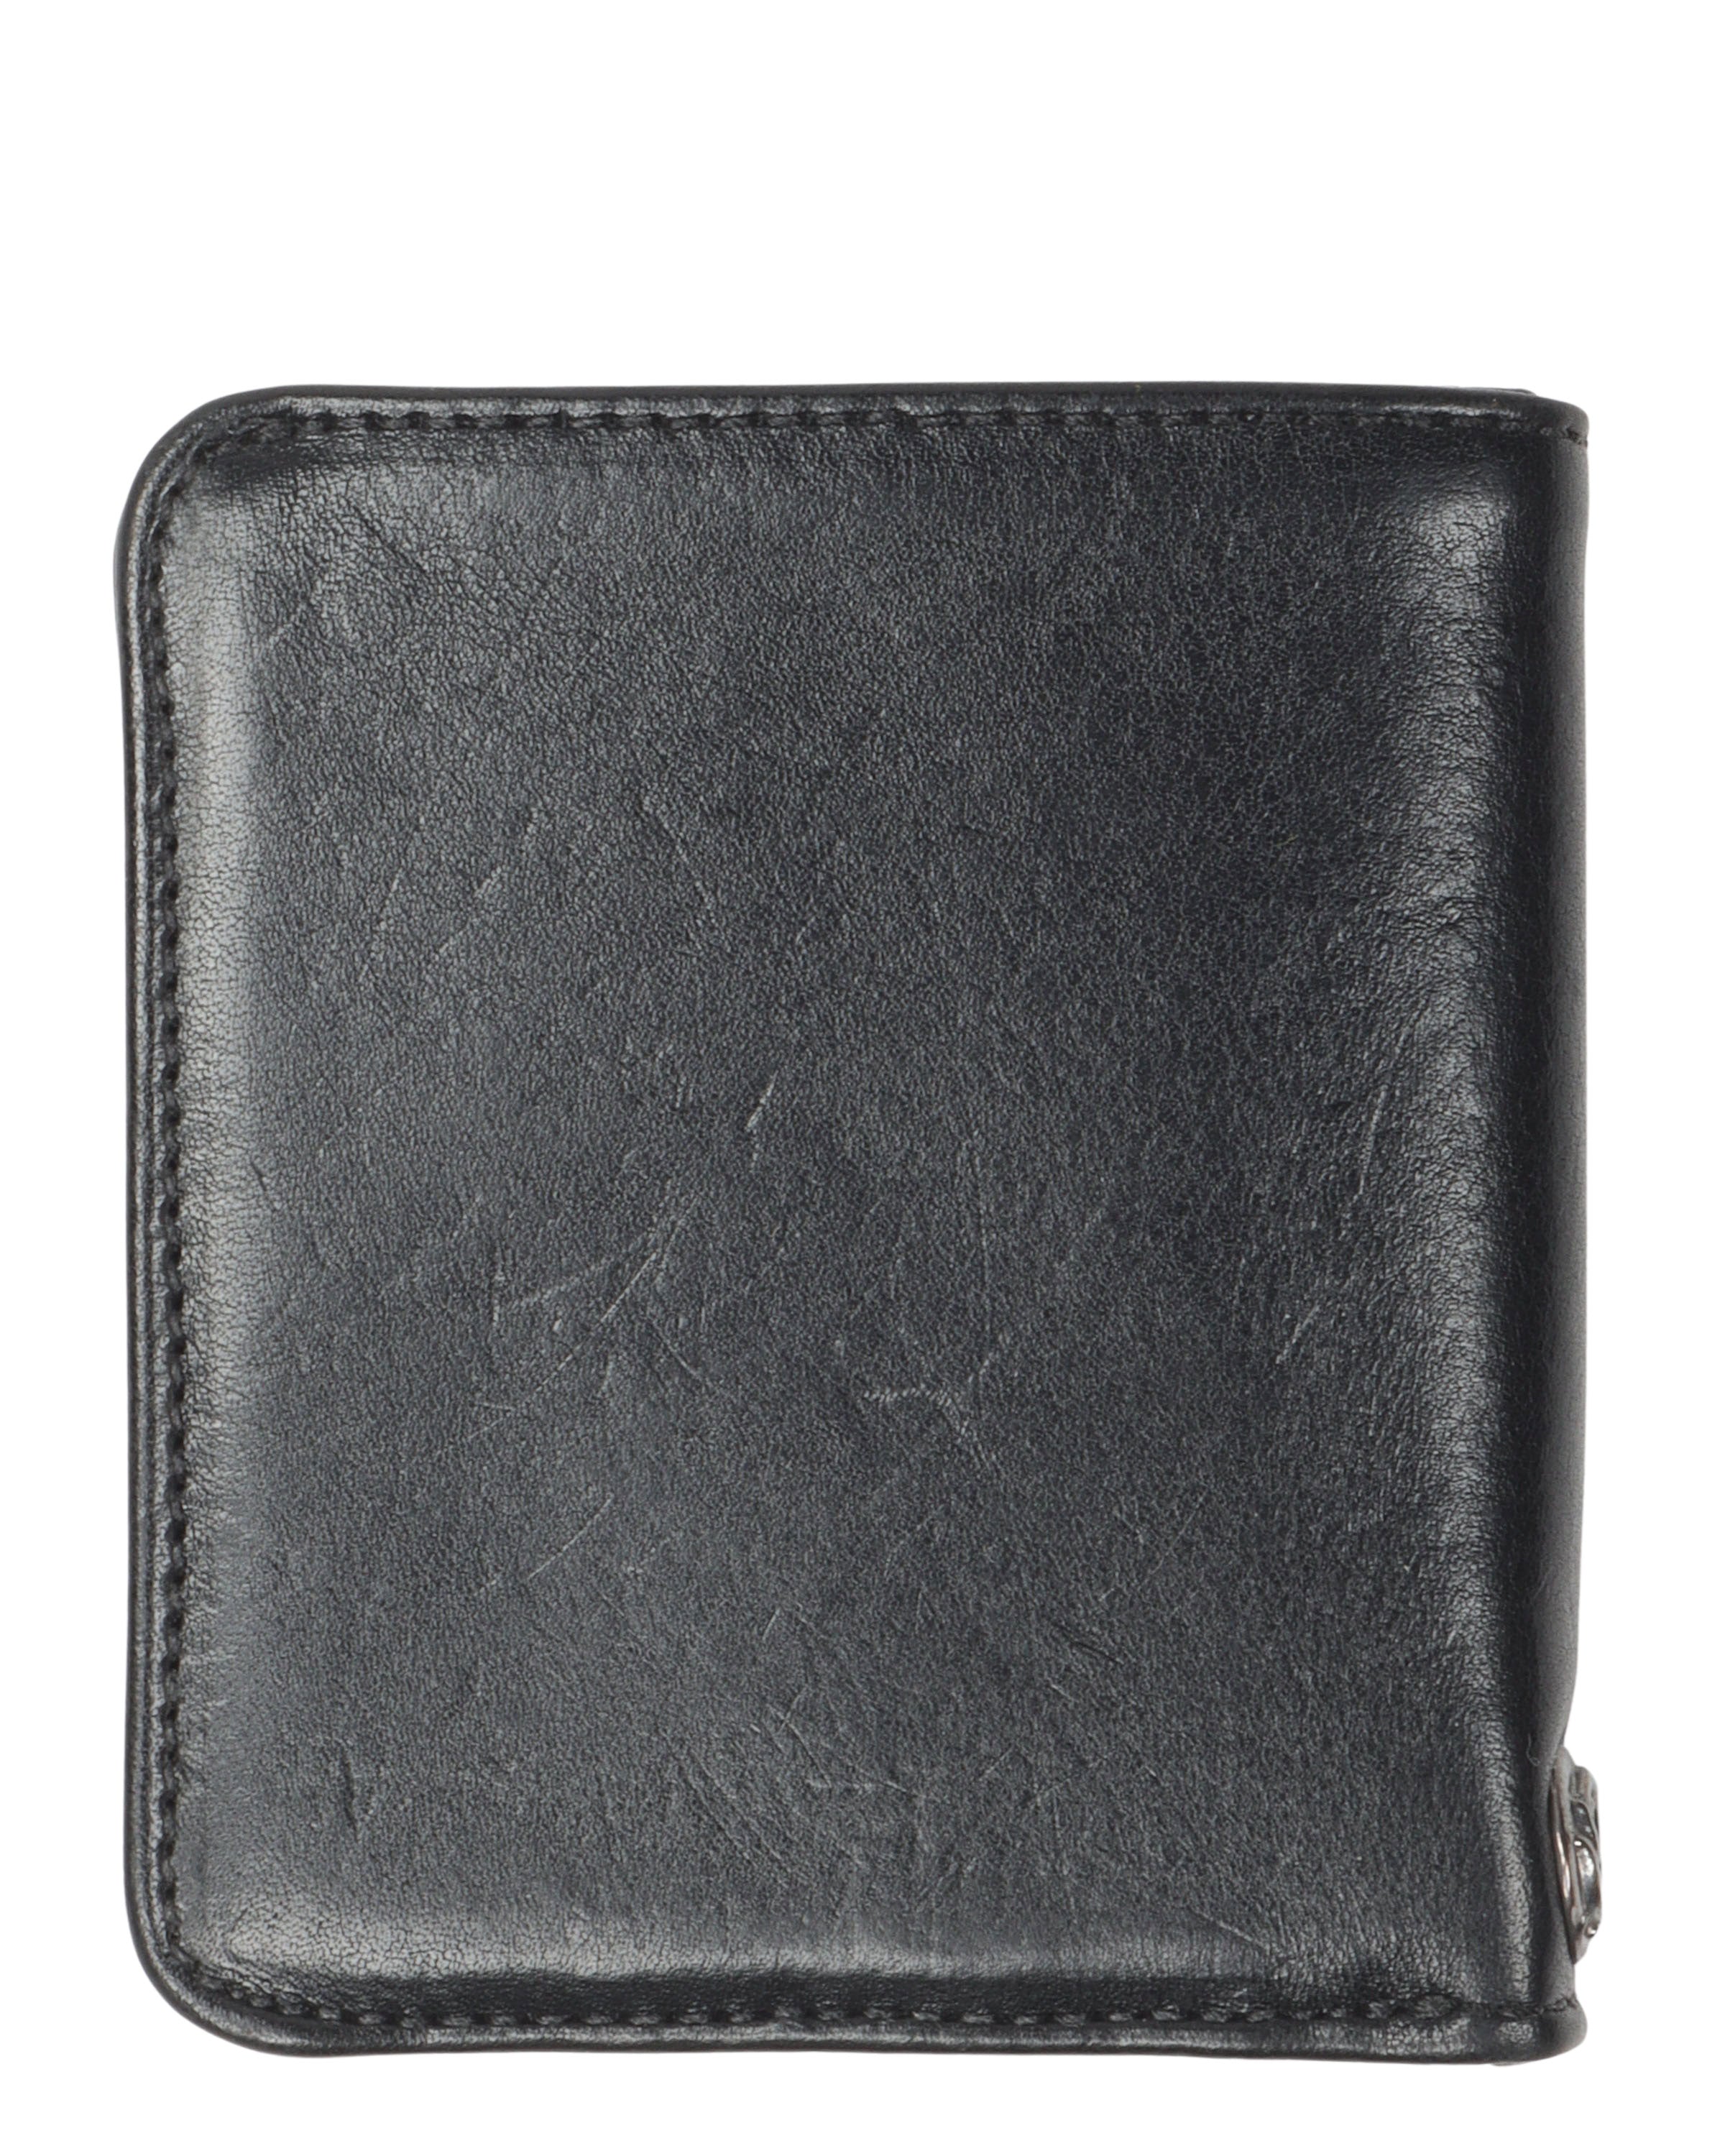 Leather Silver Cross Patch Wallet